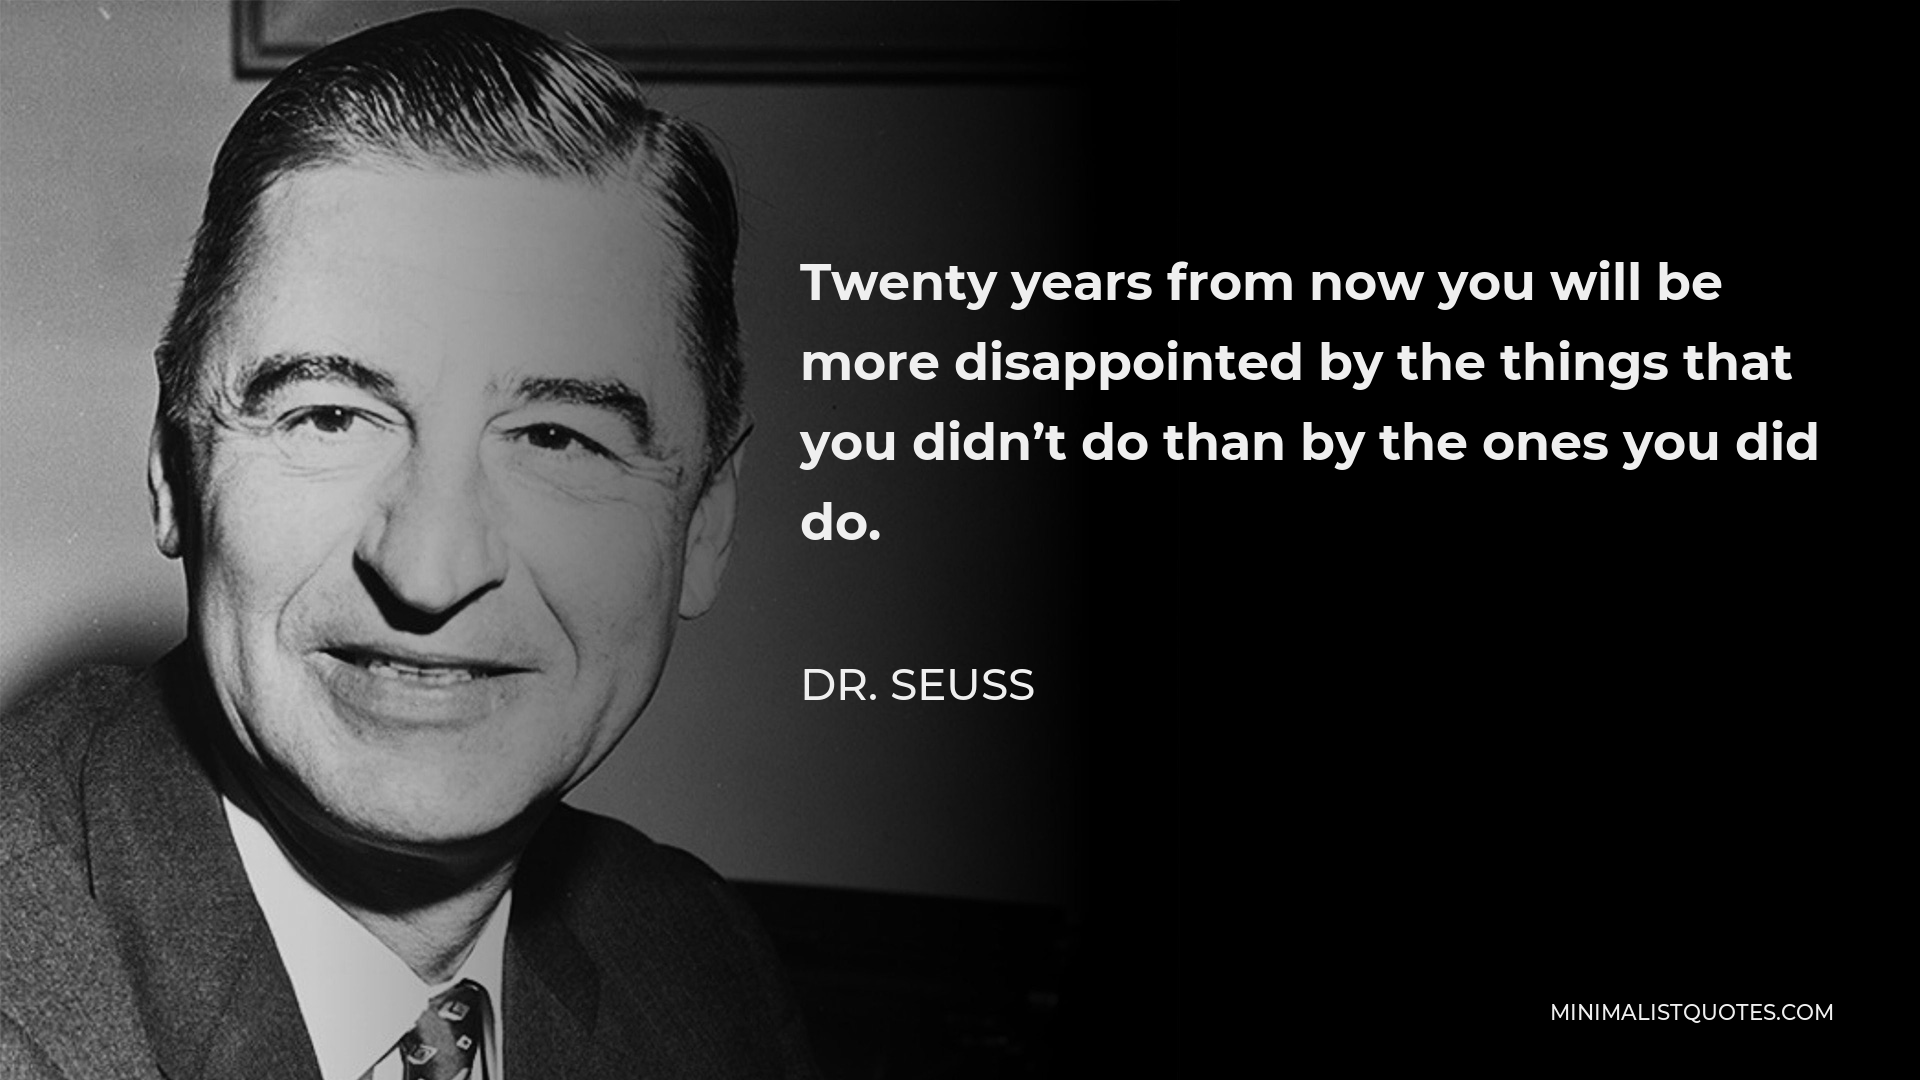 Dr. Seuss Quote - Twenty years from now you will be more disappointed by the things that you didn’t do than by the ones you did do.